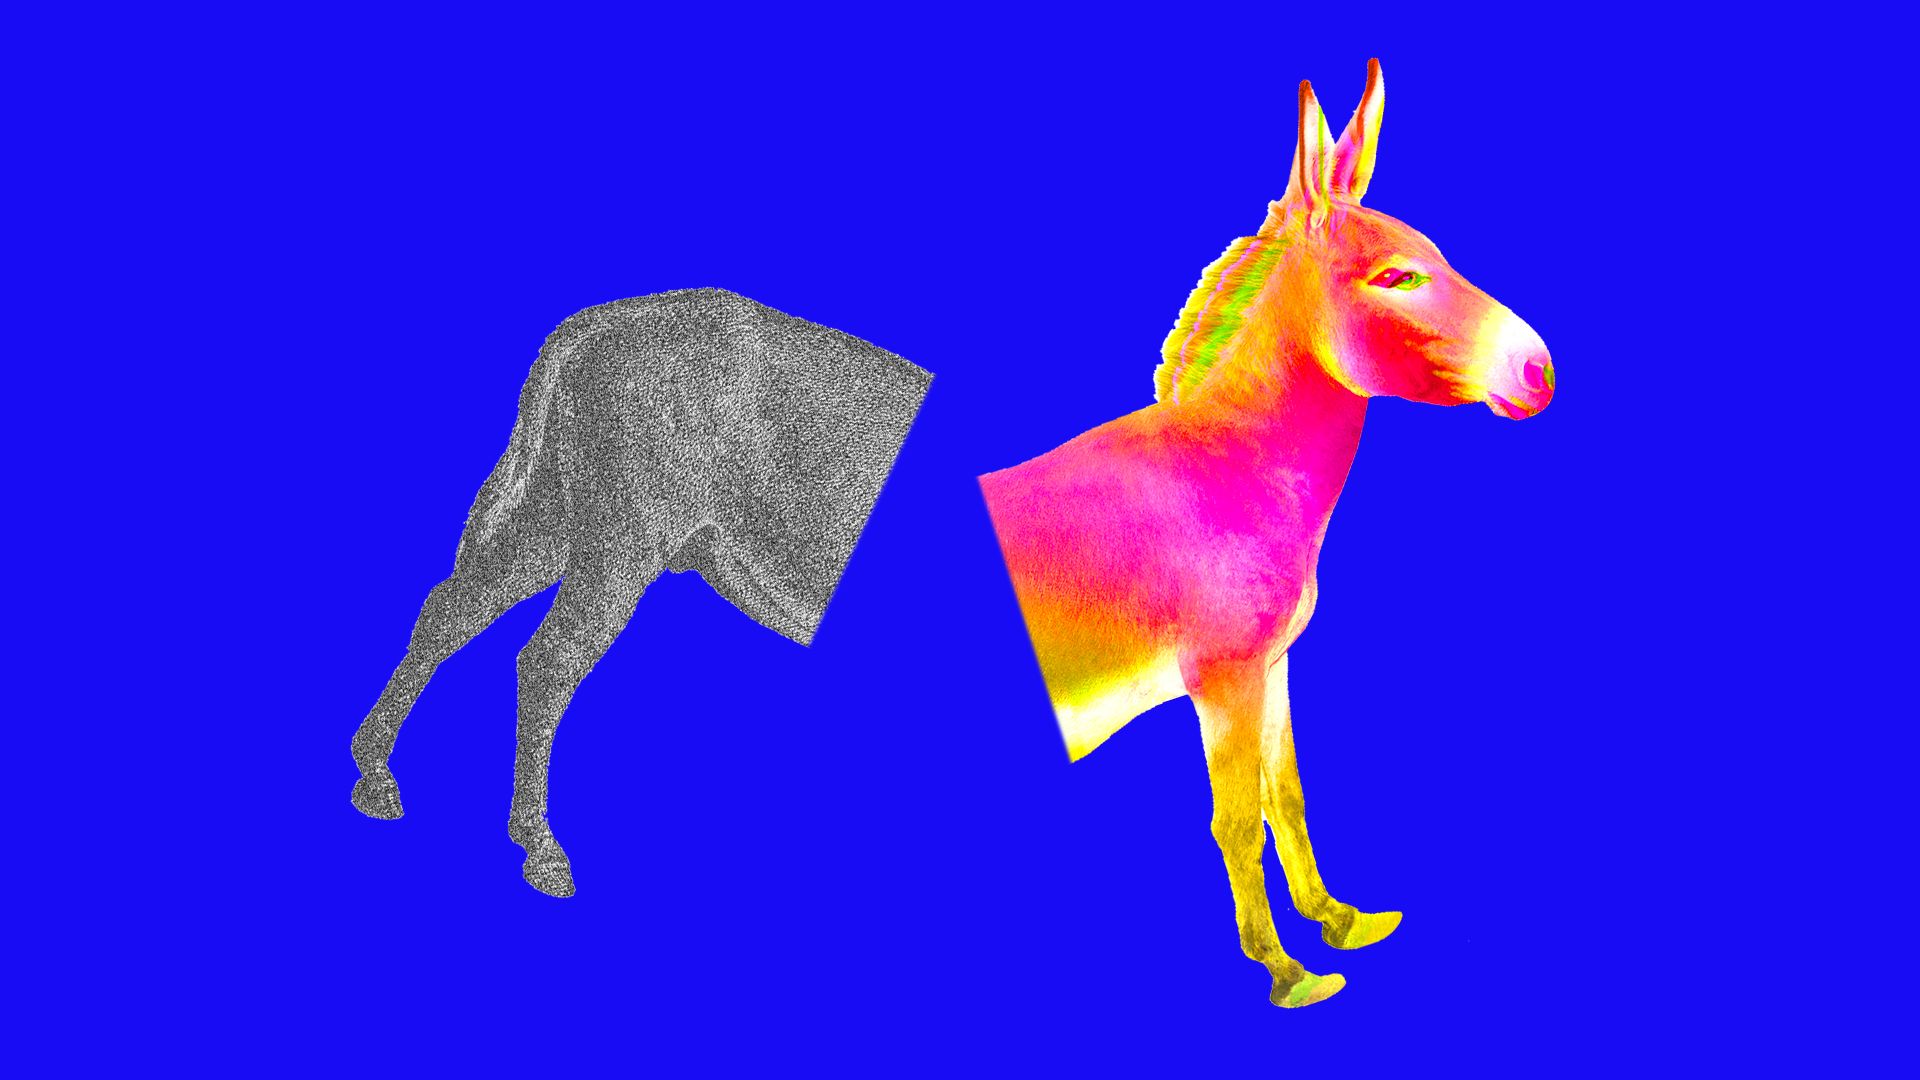 This illustration shows a donkey, symbolizing the Democratic party, split in half and shown in different colors.